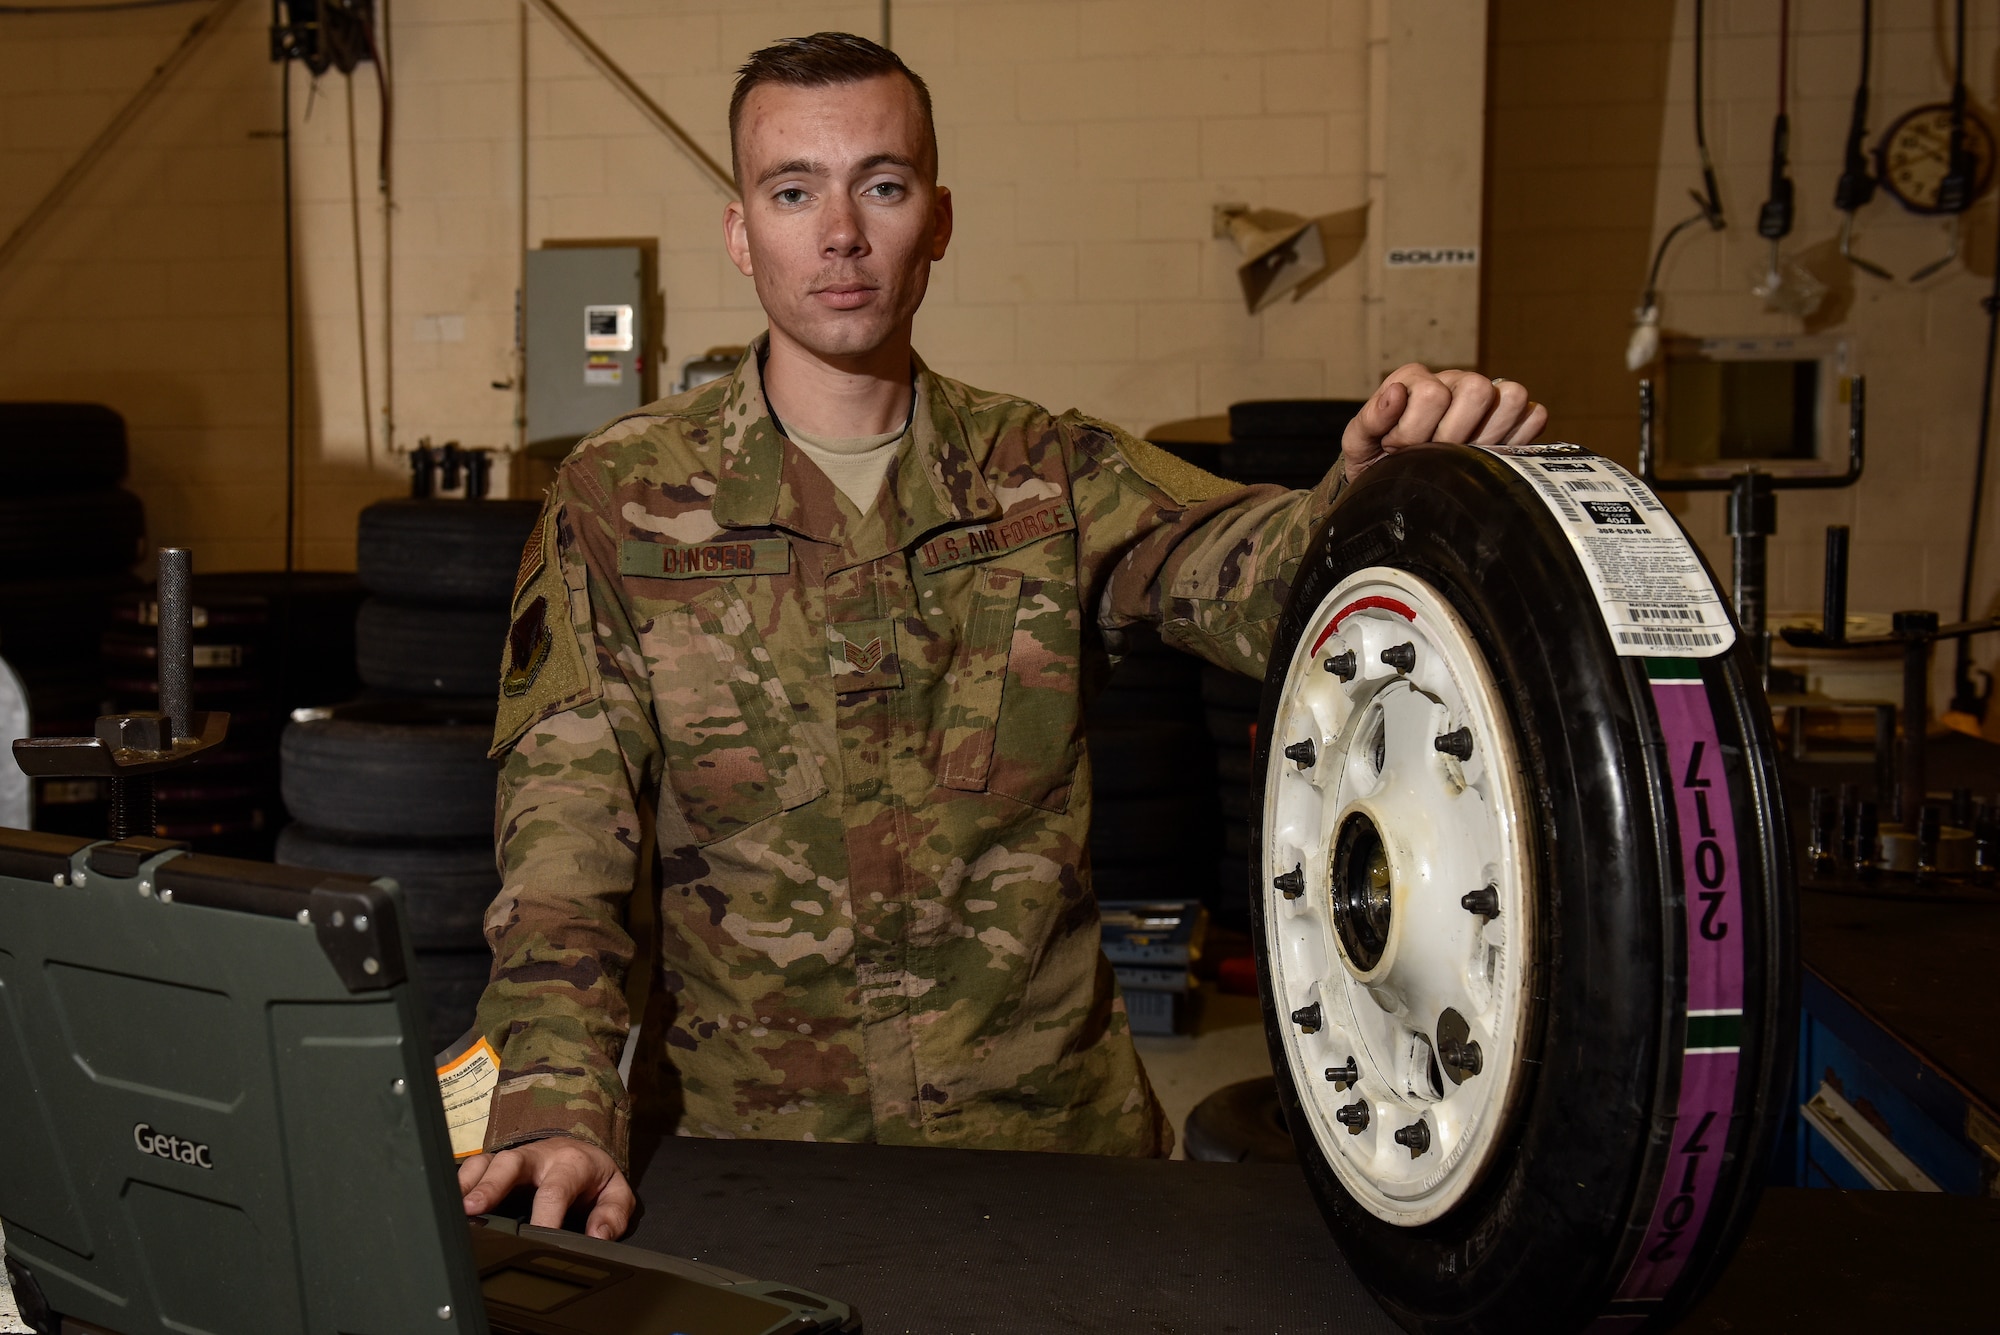 Staff Sgt. Kyle Dinger, 325th Aircraft Maintenance Squadron crew chief, poses for a portrait in the wheel and tire section at Tyndall Air Force Base, Fla. March 6, 2019.(U.S. Air Force photo by Staff Sgt. Alexandre Montes)